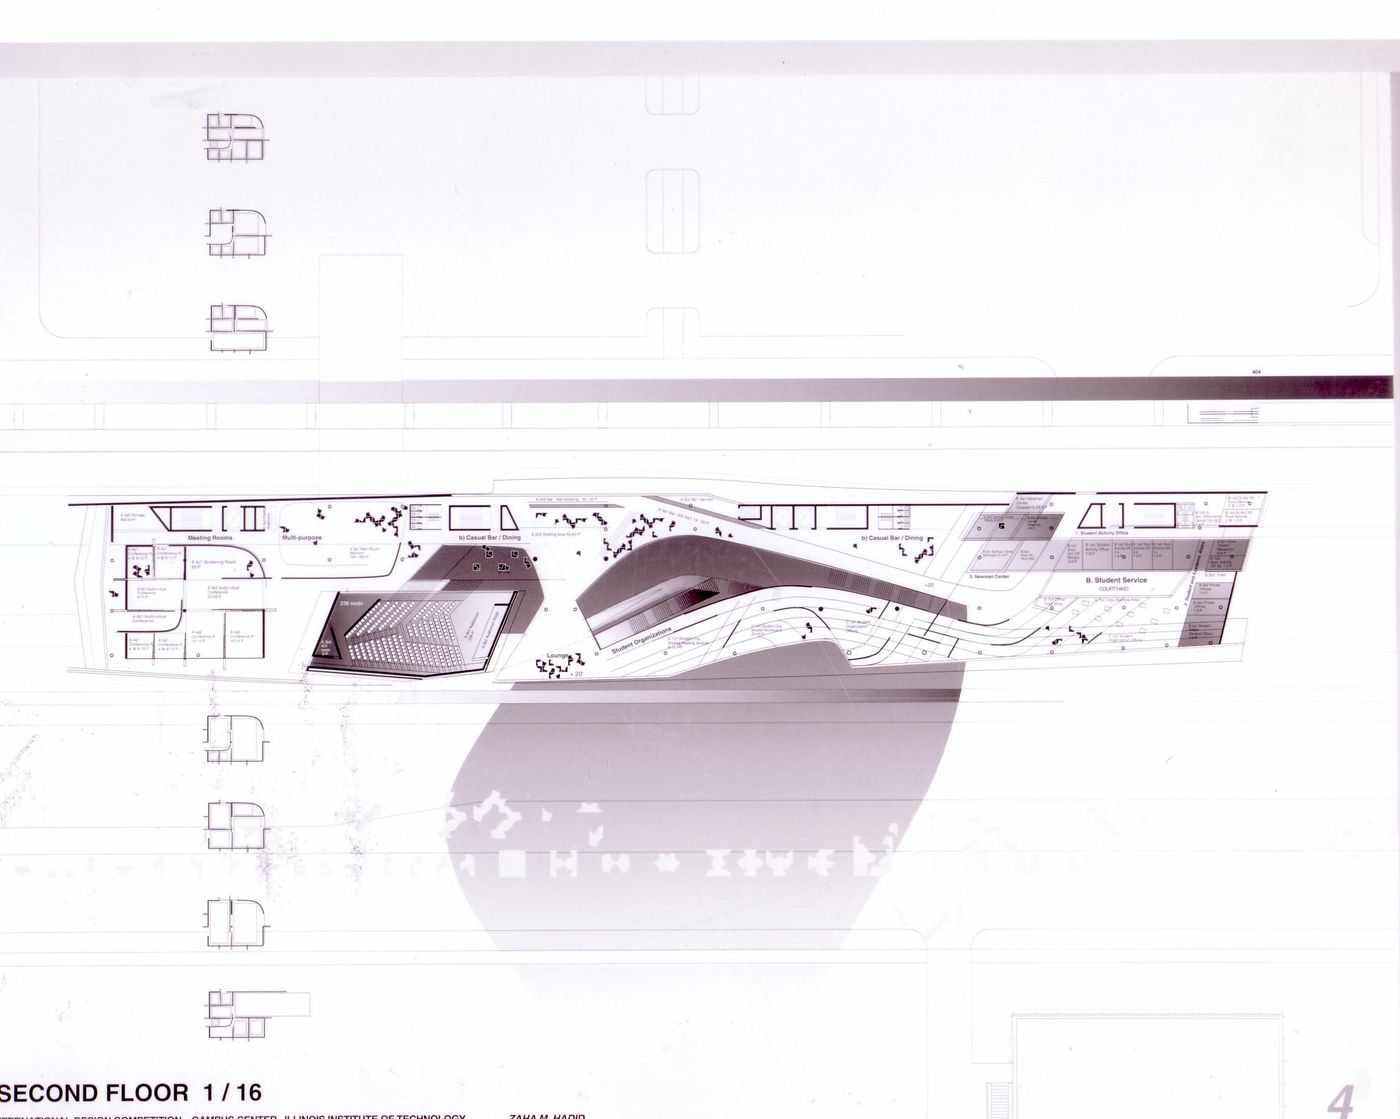 Second floor plan, submission to the Richard H. Driehaus Foundation International Design Competition for a new campus center (1997-98), Illinois Institute of Technology, Chicago, Illinois